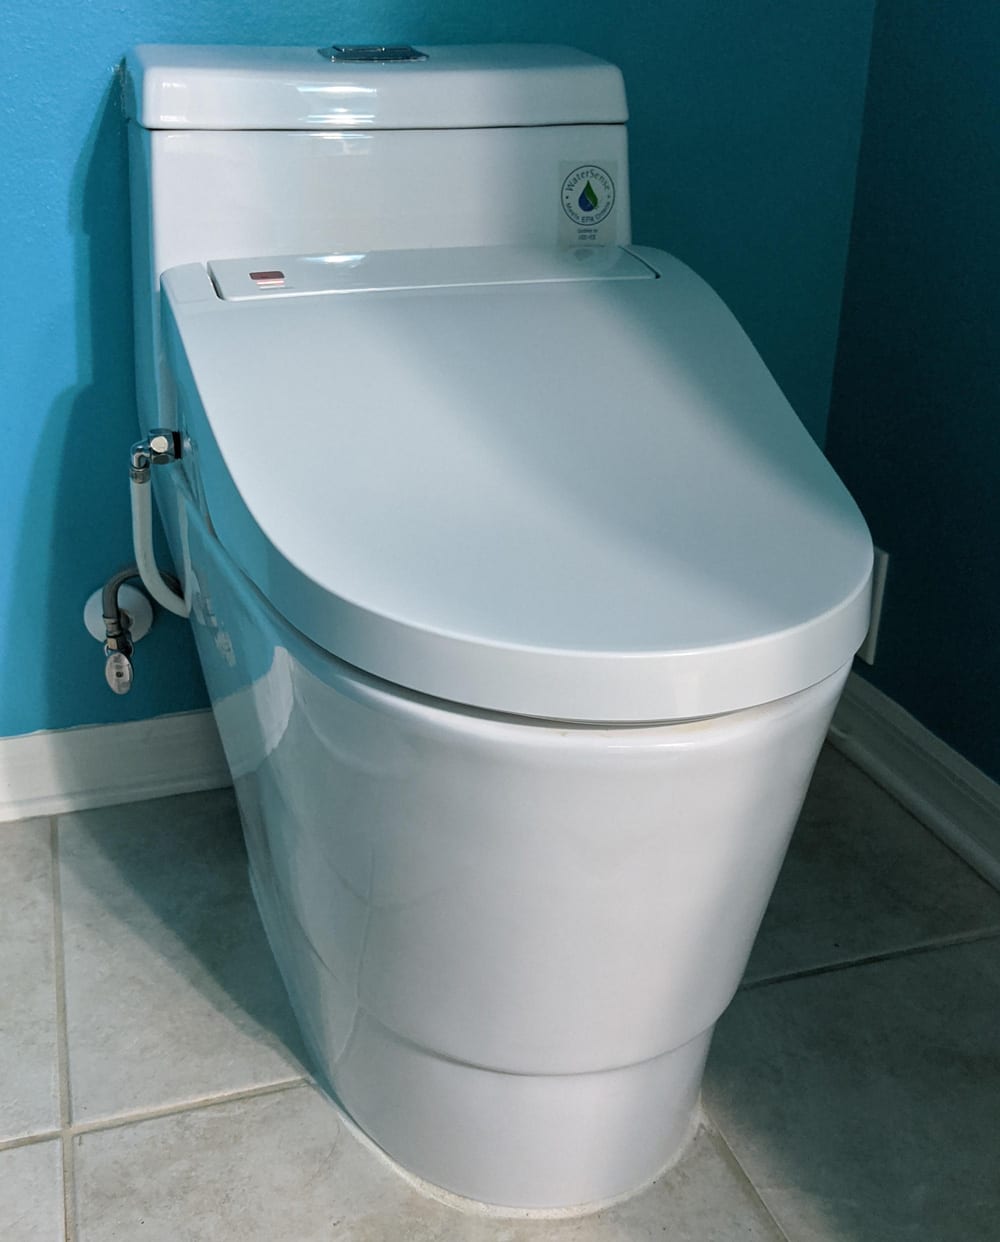 Bidets are the Use a Bidet & Why They are Awesome